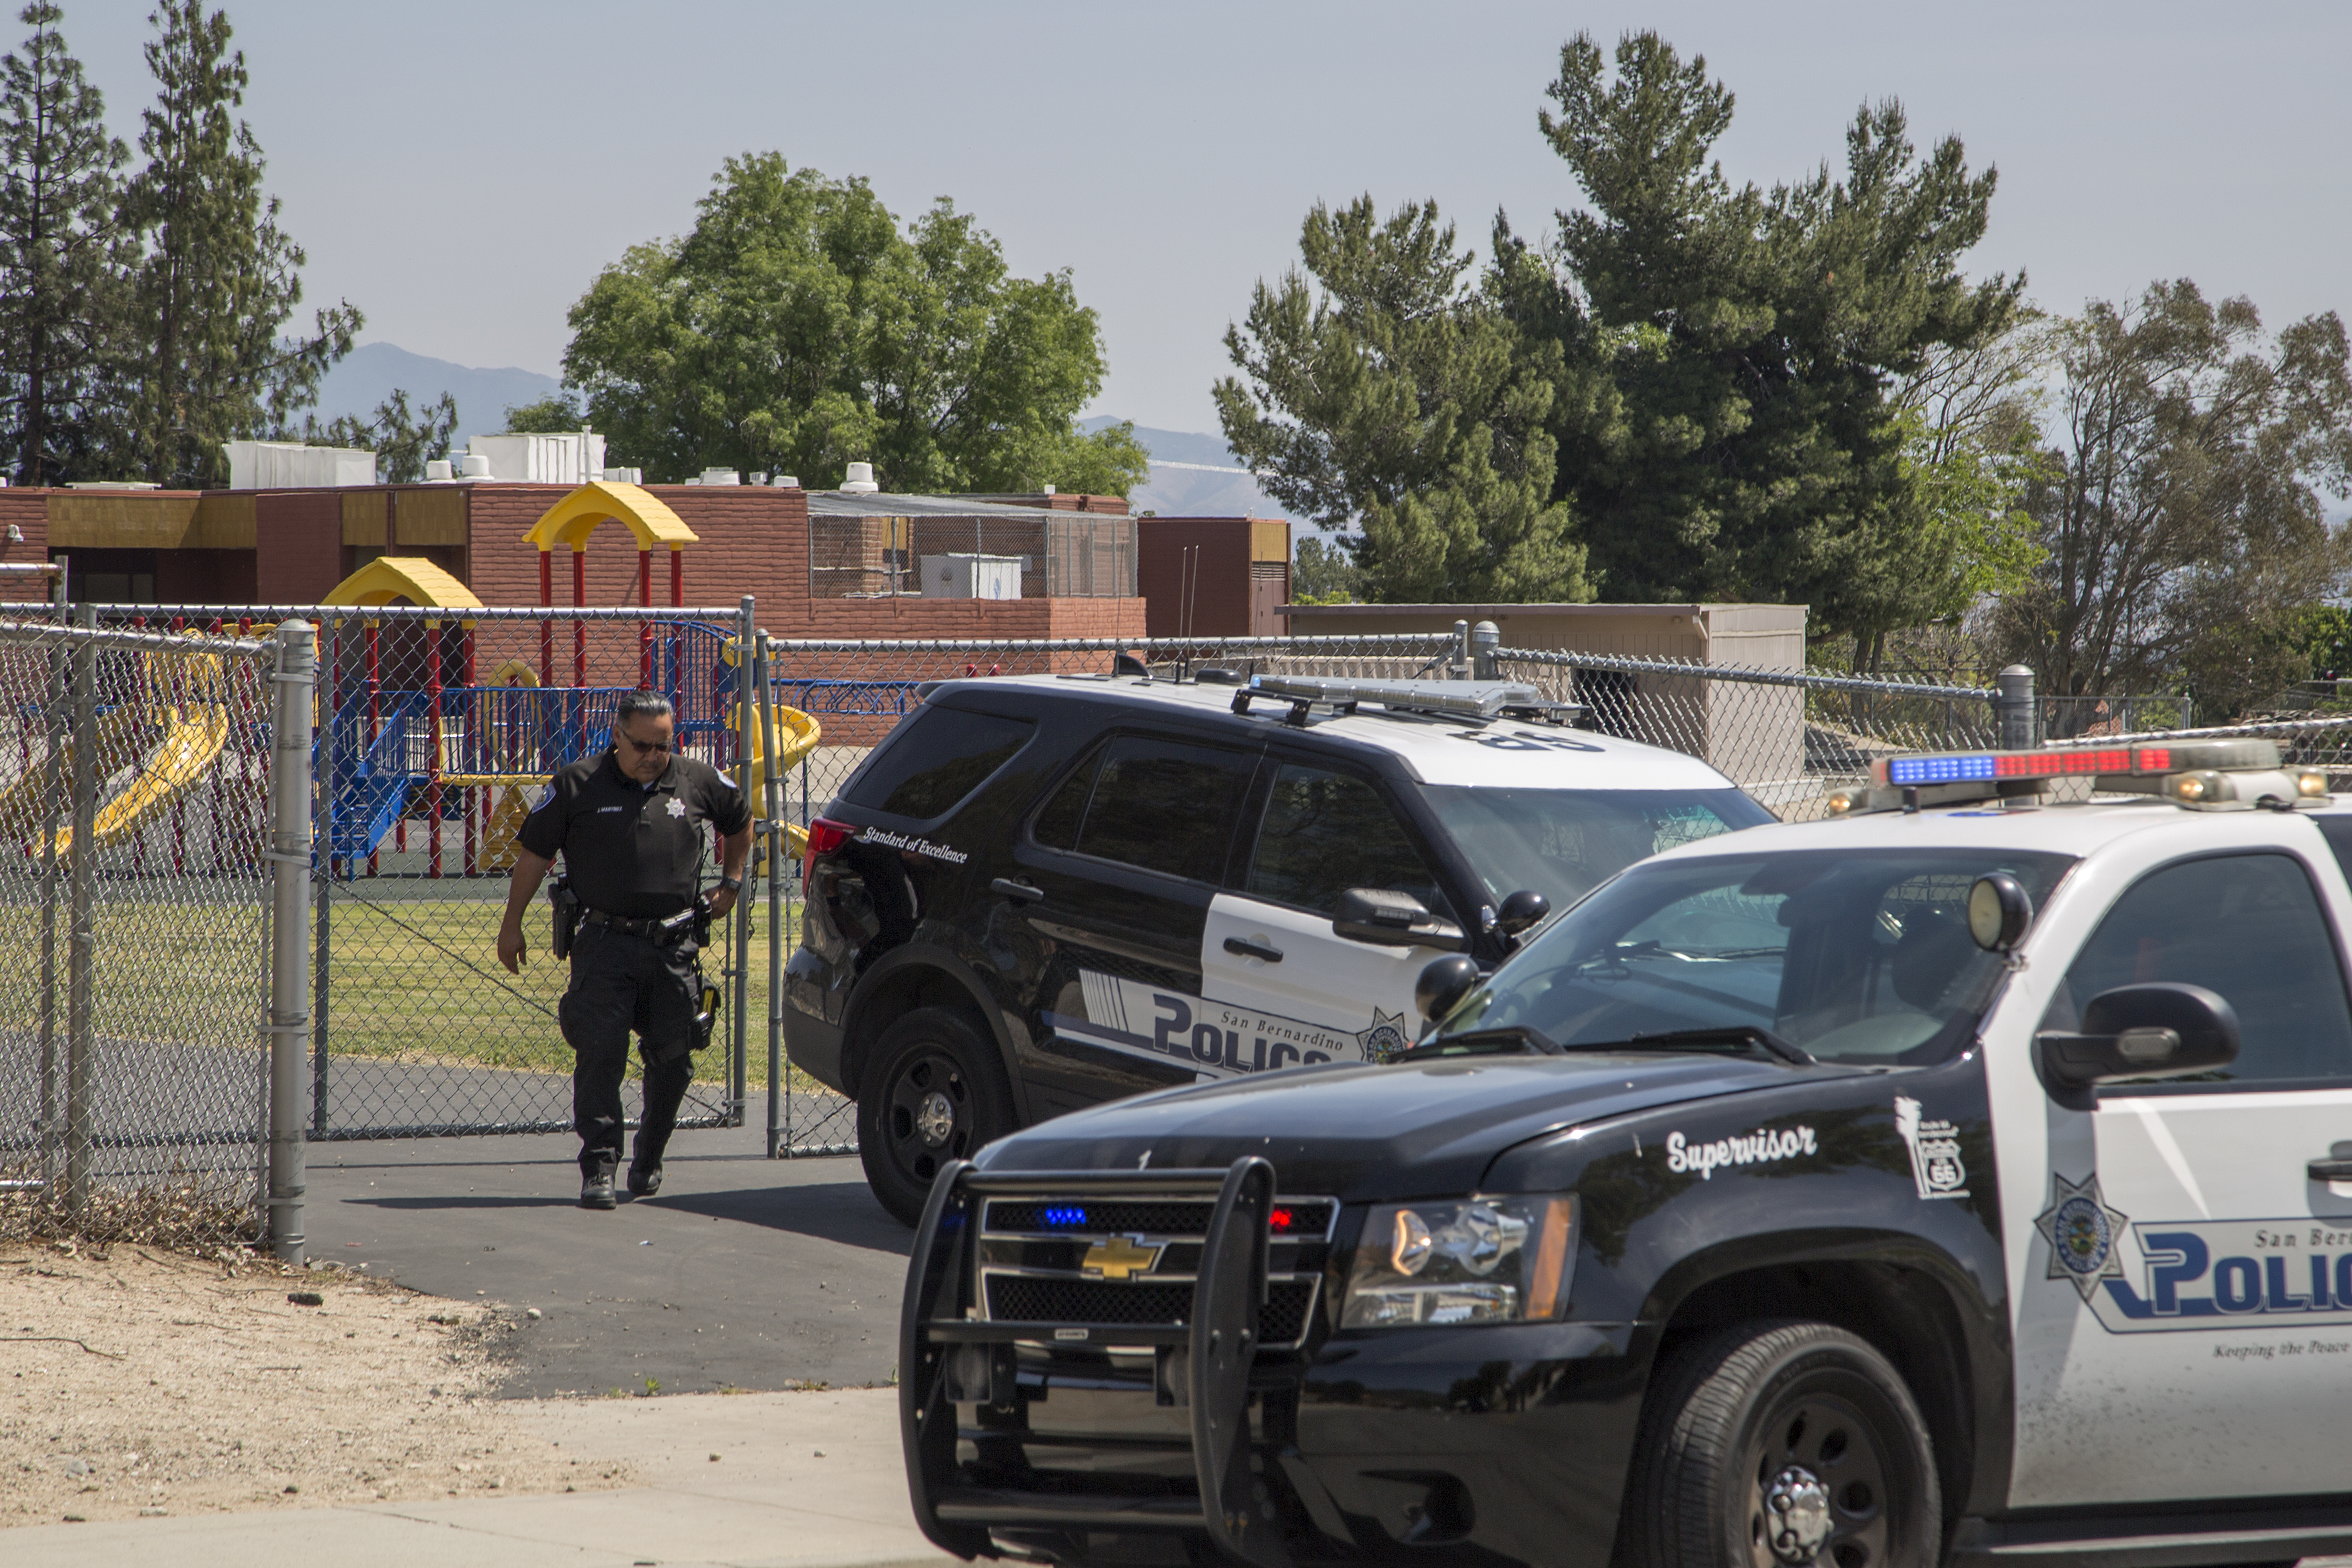 SAN BERNARDINO, CA - APRIL 10: Police officers stand guard at North Park Elementary School following a shooting on campus on April 10, 2017 in San Bernardino, California. Two people died, including the suspected shooter, and two children were wounded in the apparent murder-suicide attack. (Photo by David McNew/Getty Images)